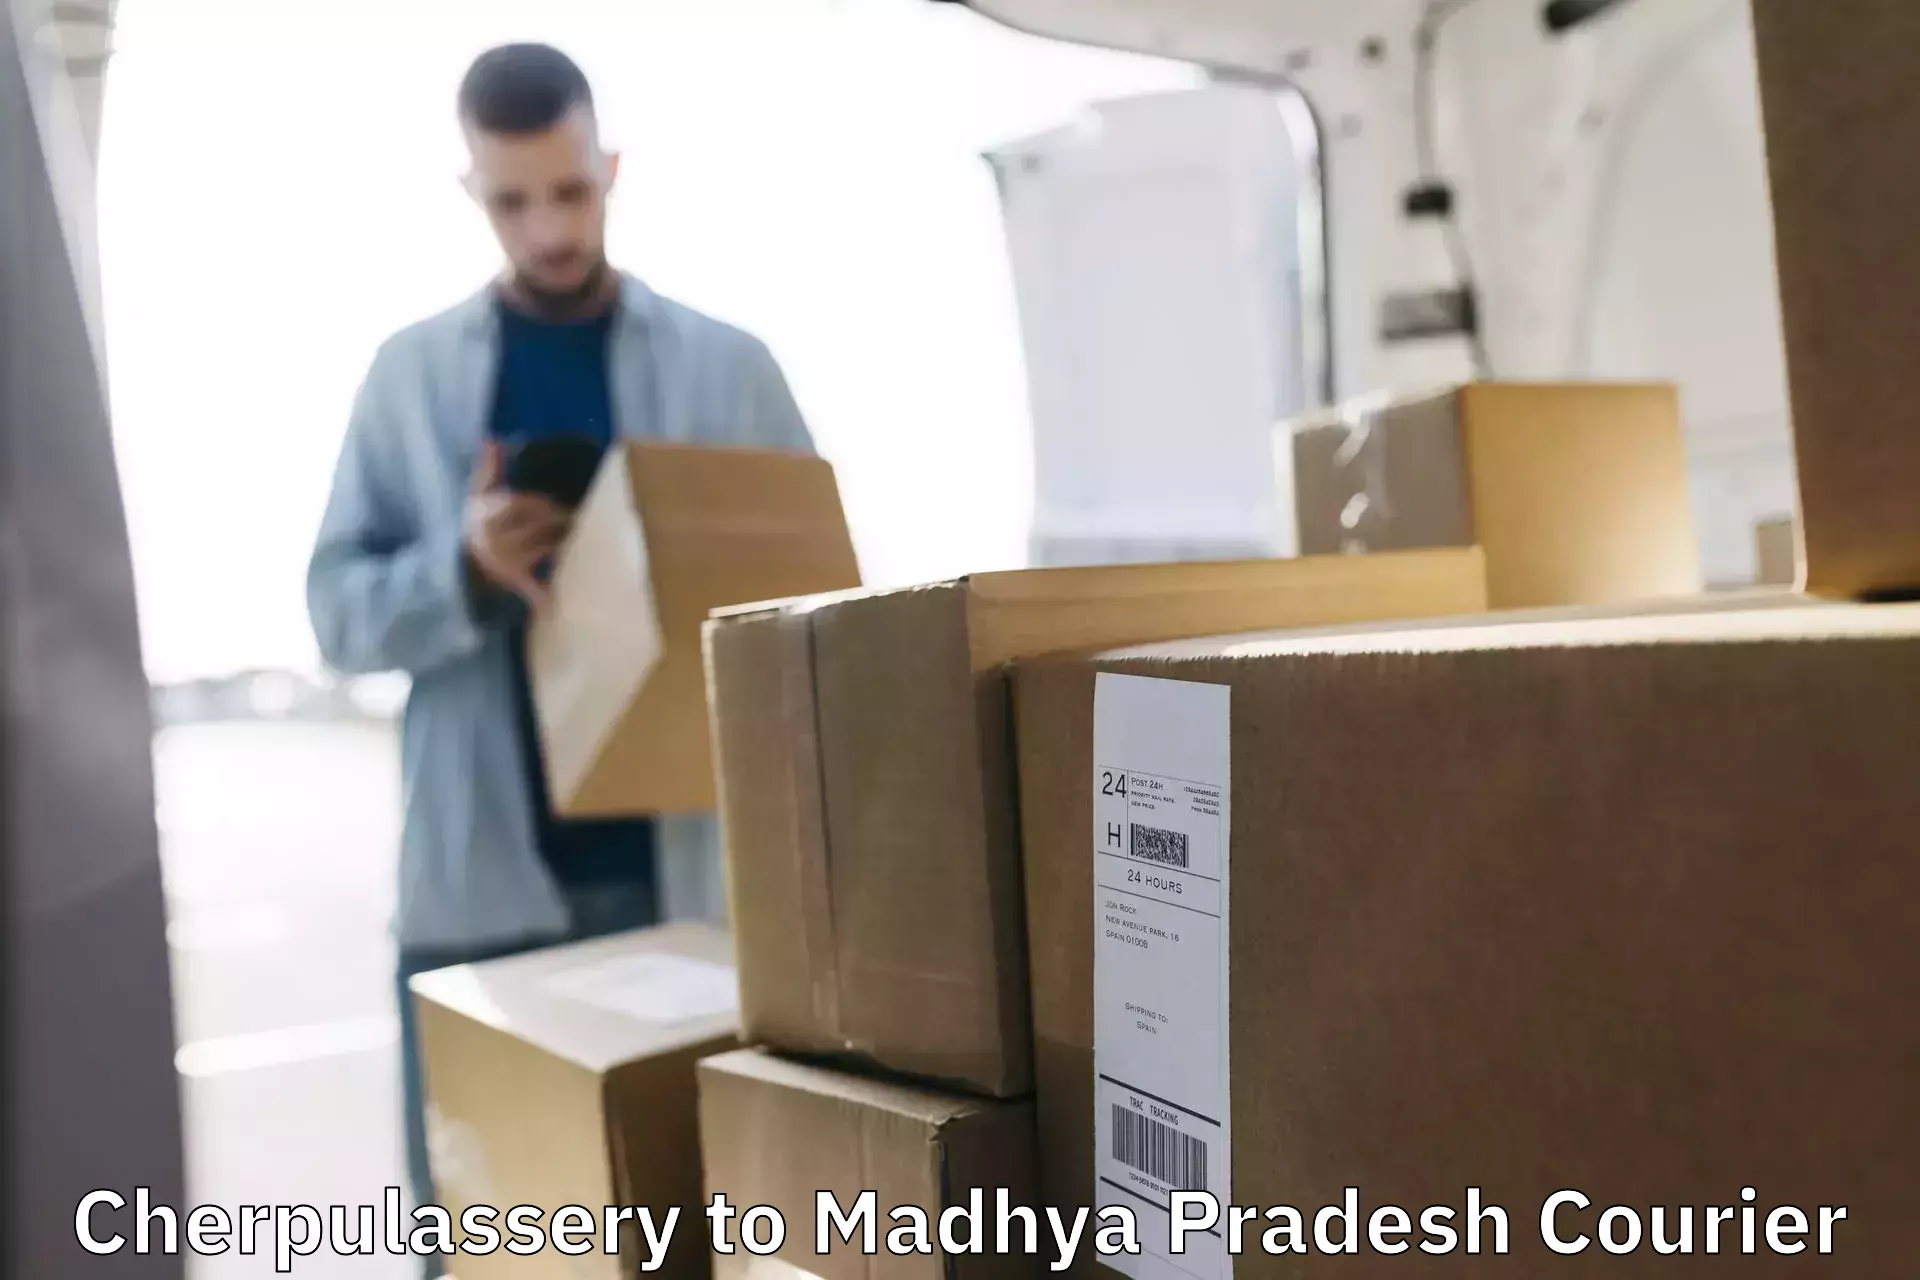 Professional courier services Cherpulassery to Begumganj